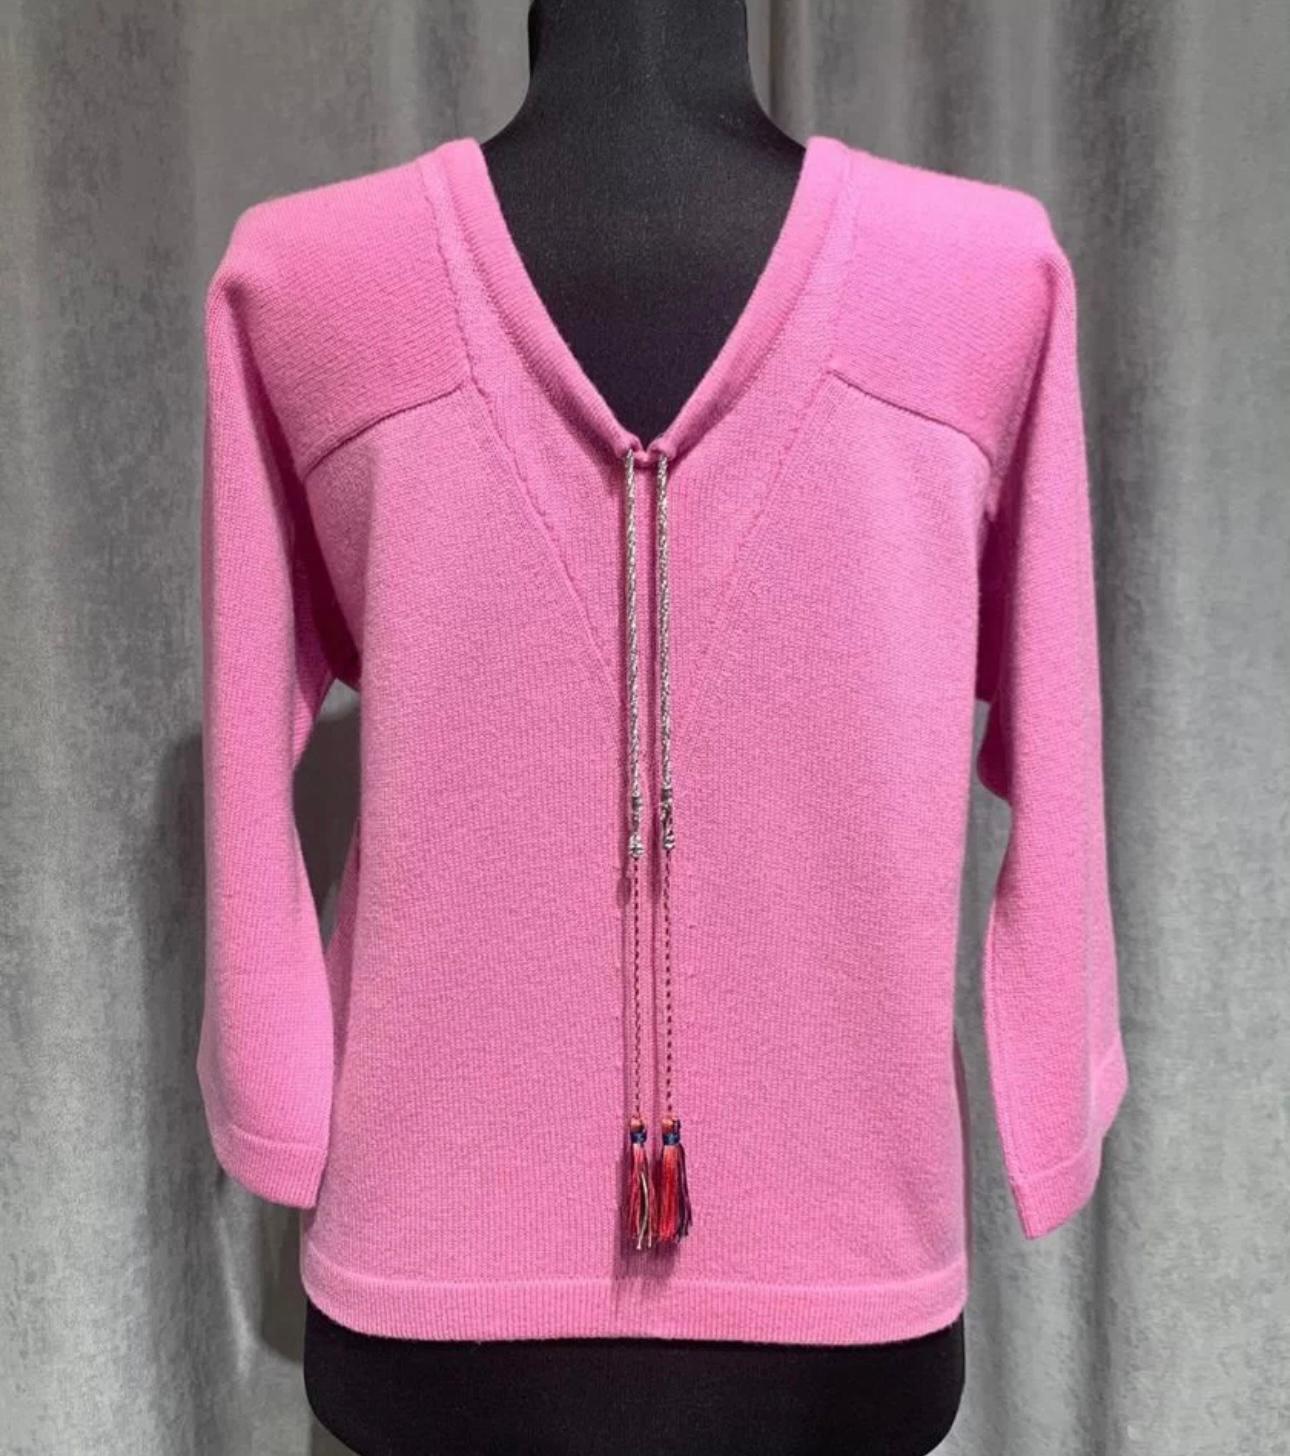 New Chanel bright pink cashmere jumper with CC logo chain link and tassels at back.
SIze mark 36 FR.